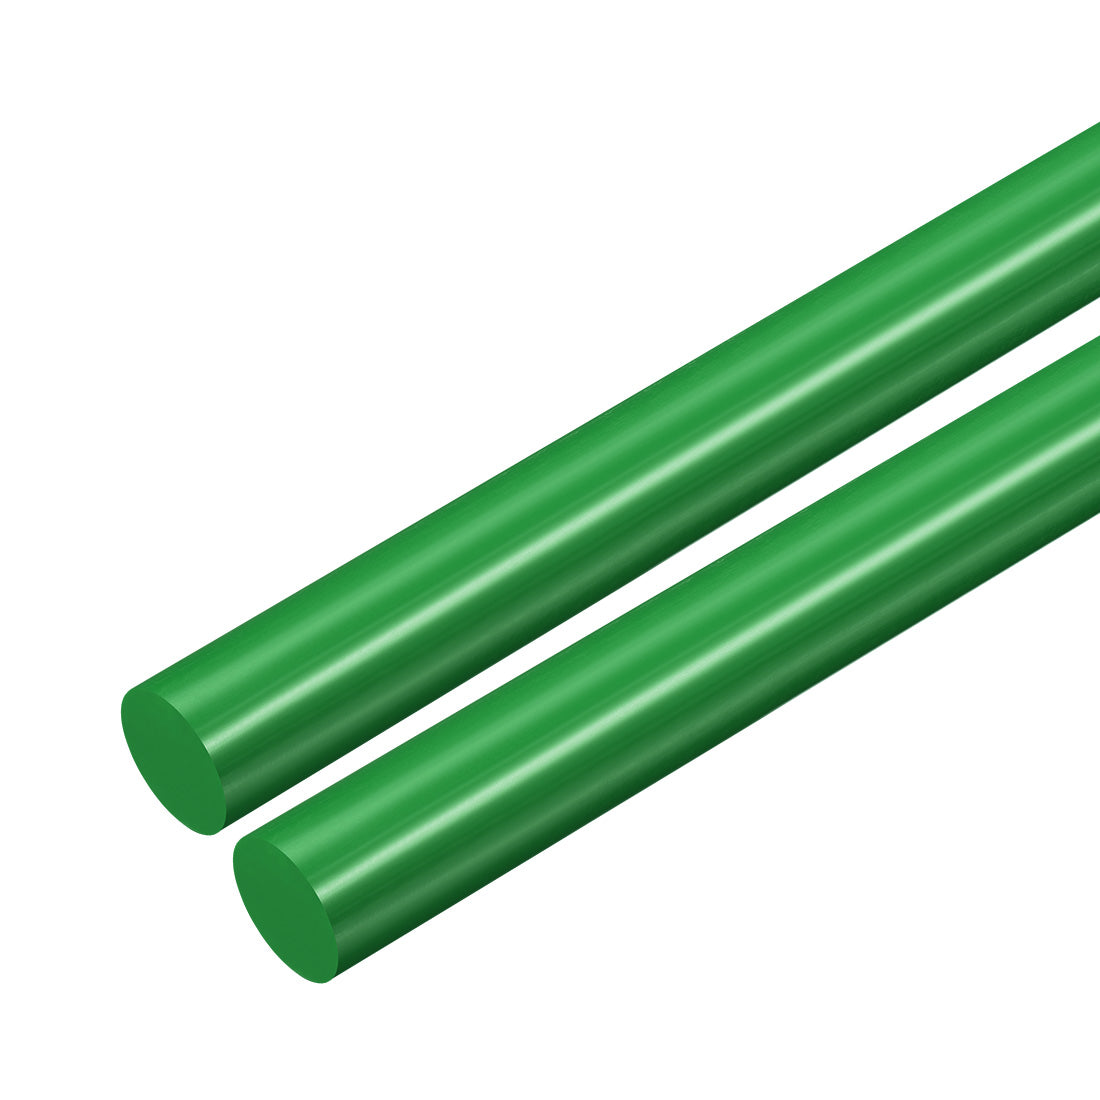 uxcell Uxcell Plastic Round Rod,15mm Dia 50cm Green Engineering Plastic Round Bar 2pcs